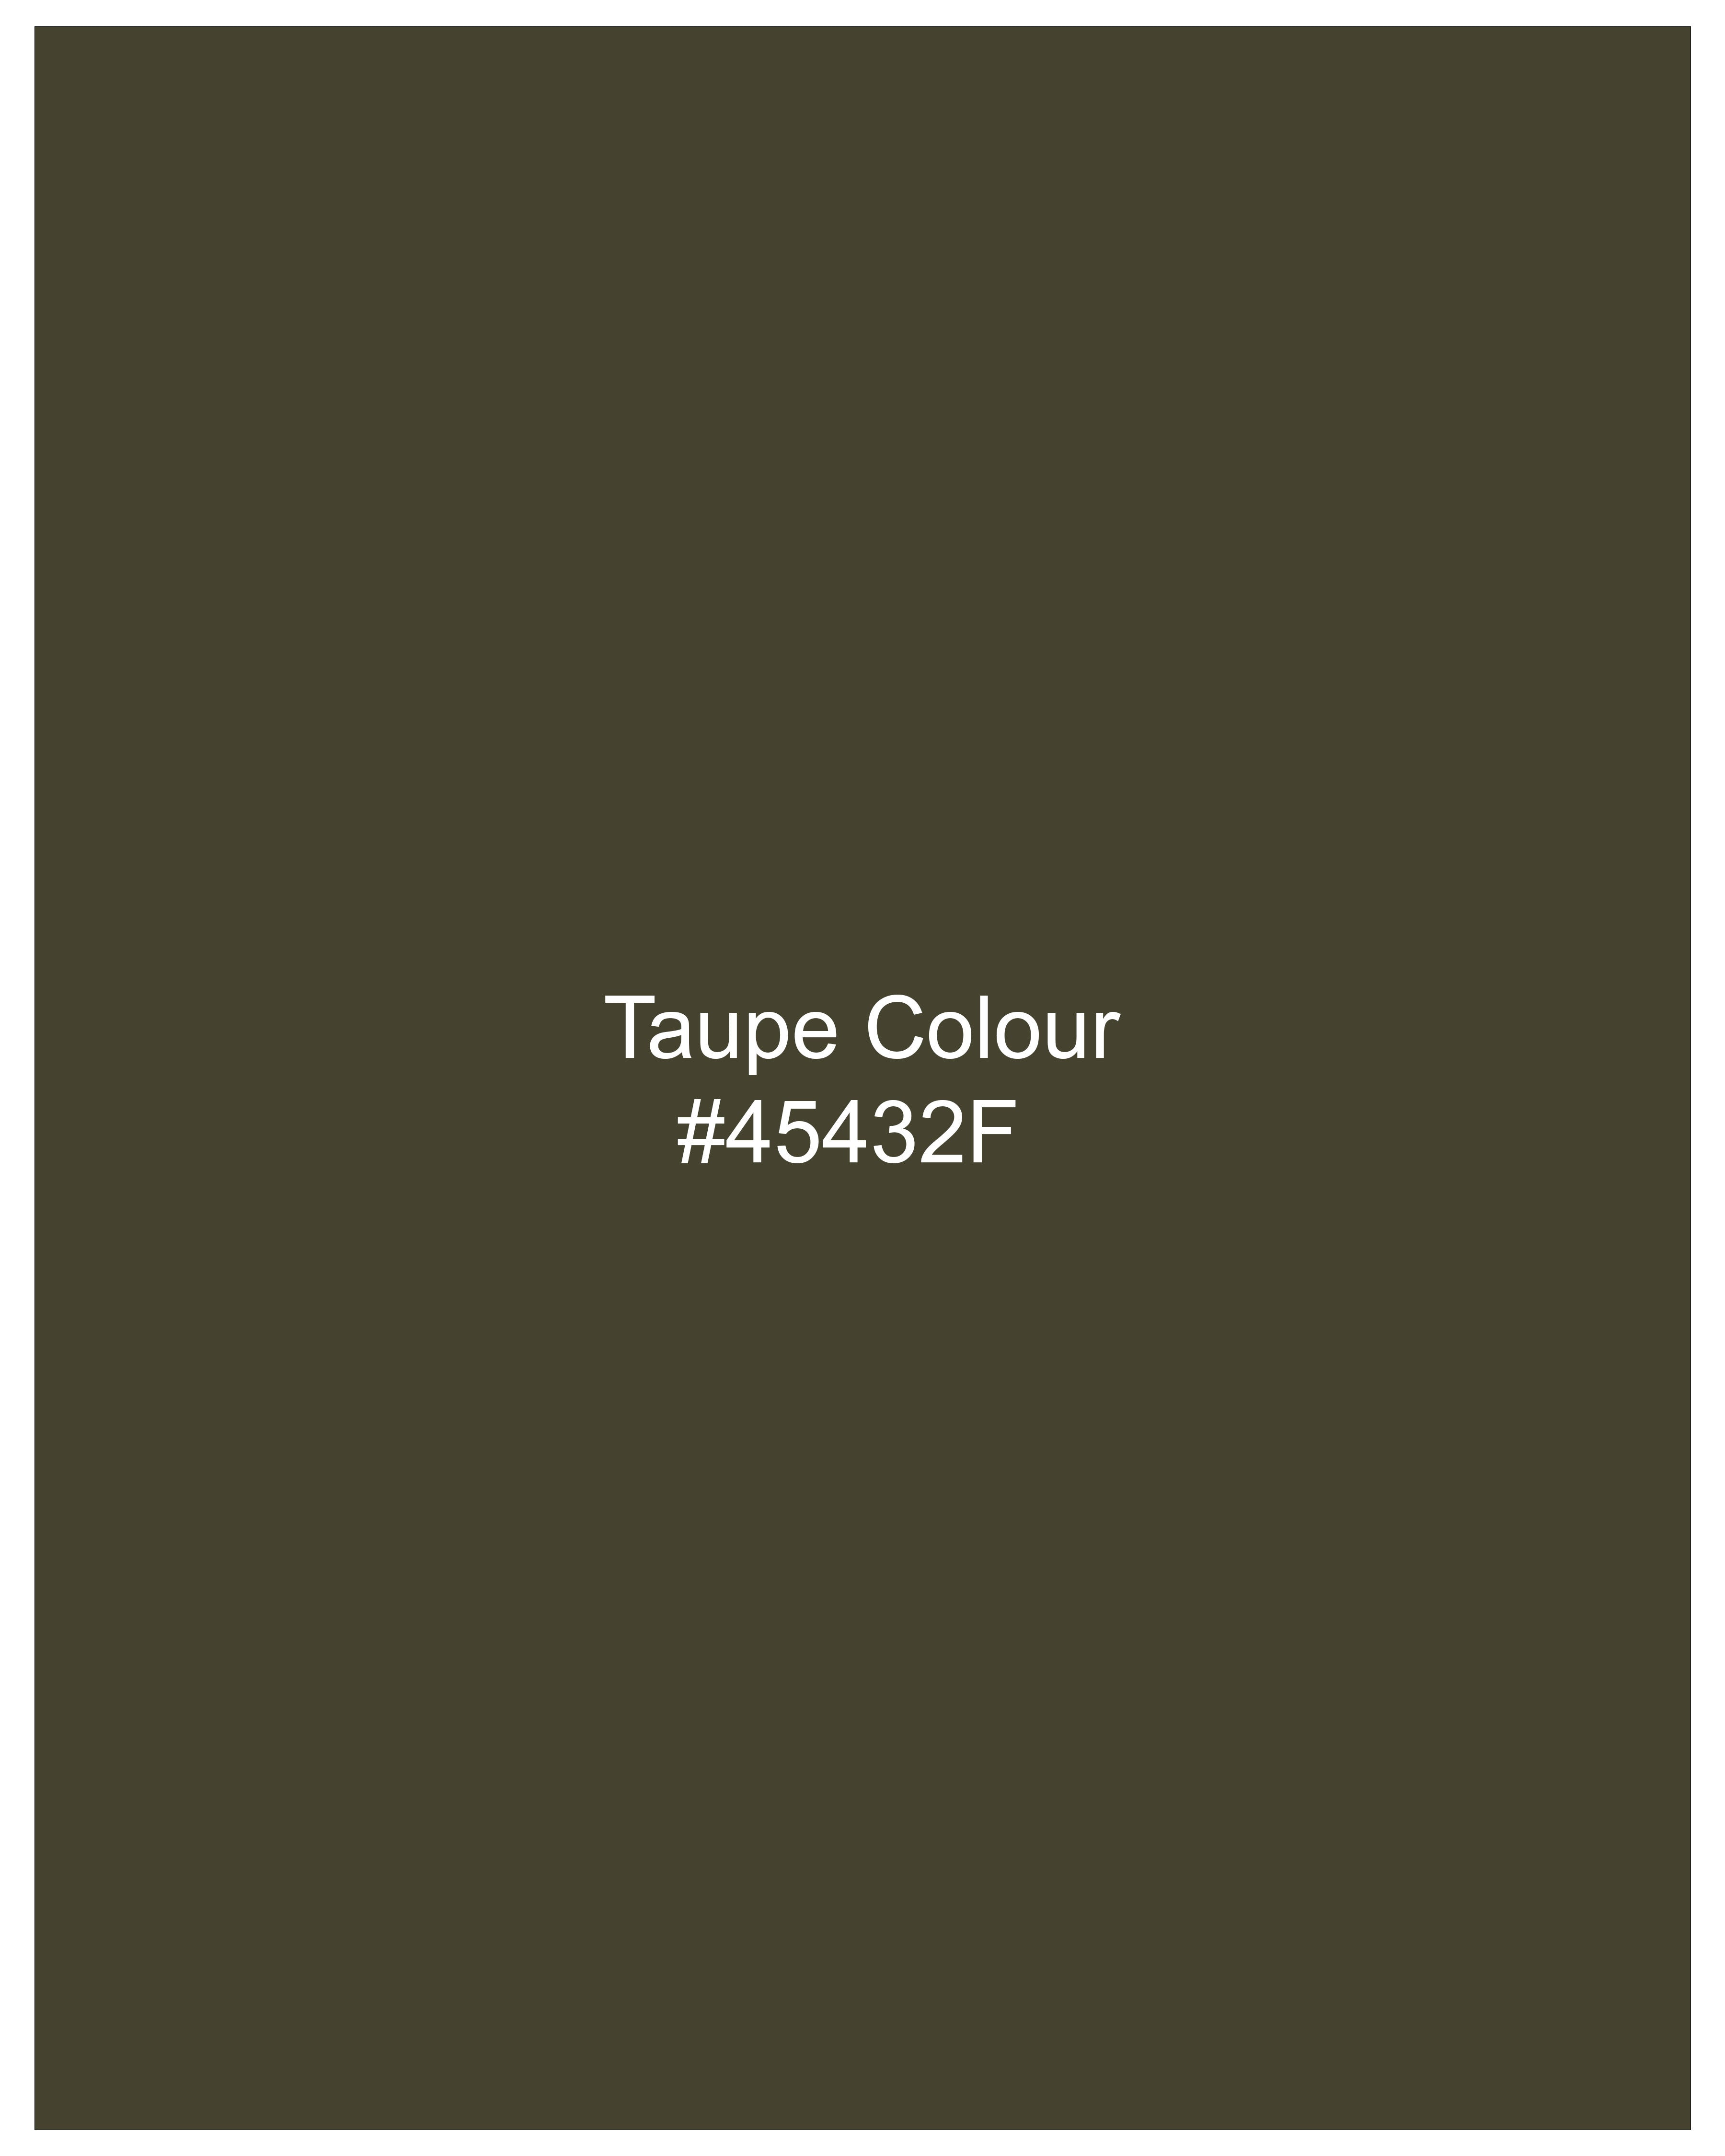 Taupe Green Solid Stretchable Premium Cotton traveler Pant T2642-28, T2642-30, T2642-32, T2642-34, T2642-36, T2642-38, T2642-40, T2642-42, T2642-44